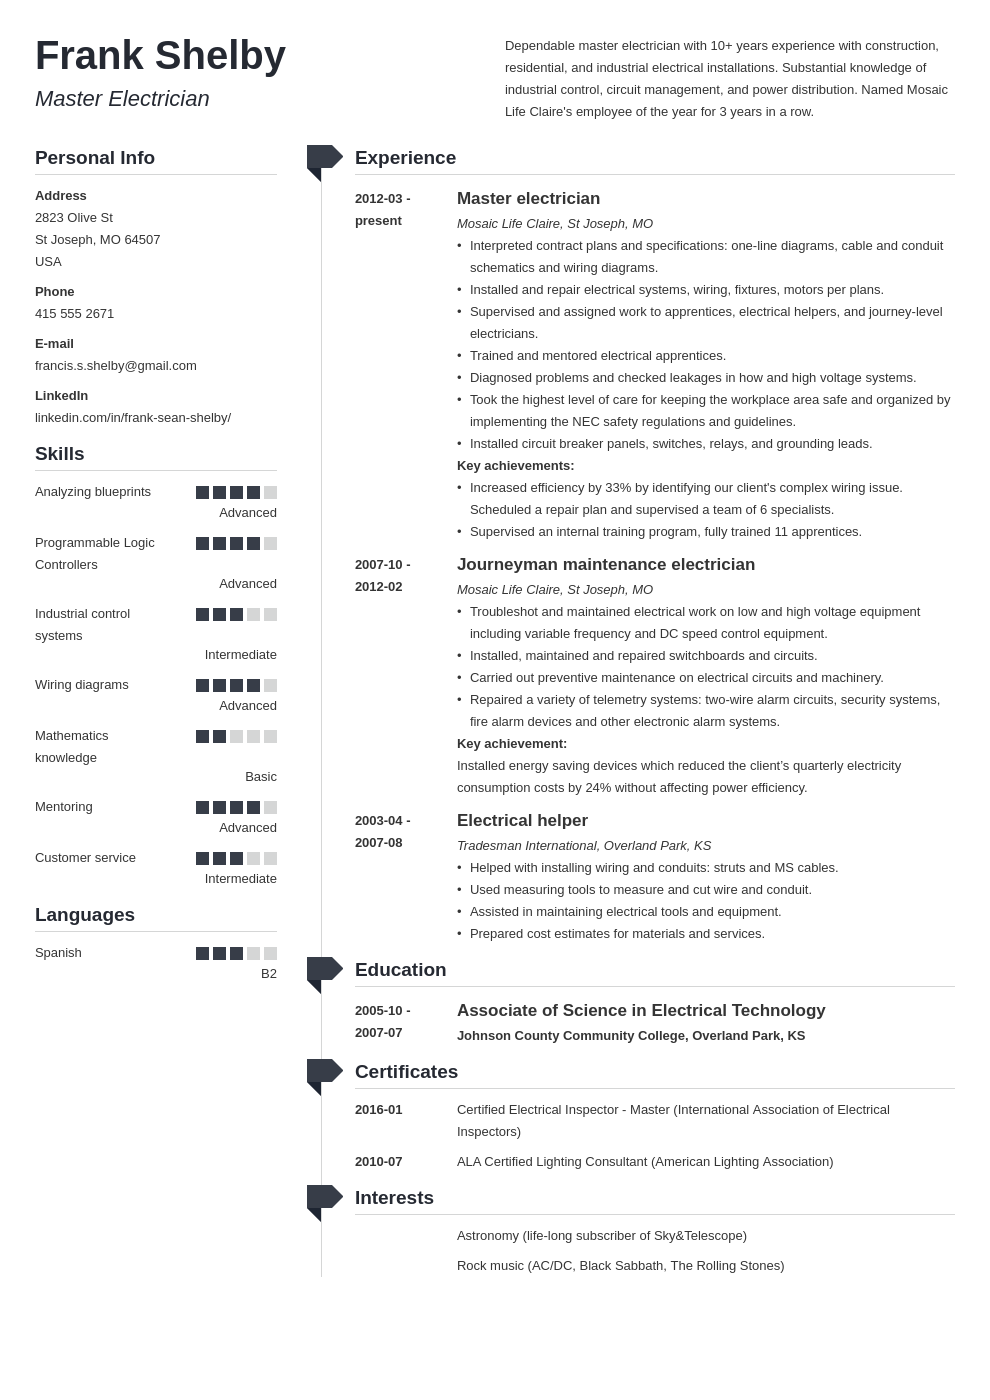 Resume Excellence in 2023: 10+ Synonyms for 'Teamwork' (with examples)